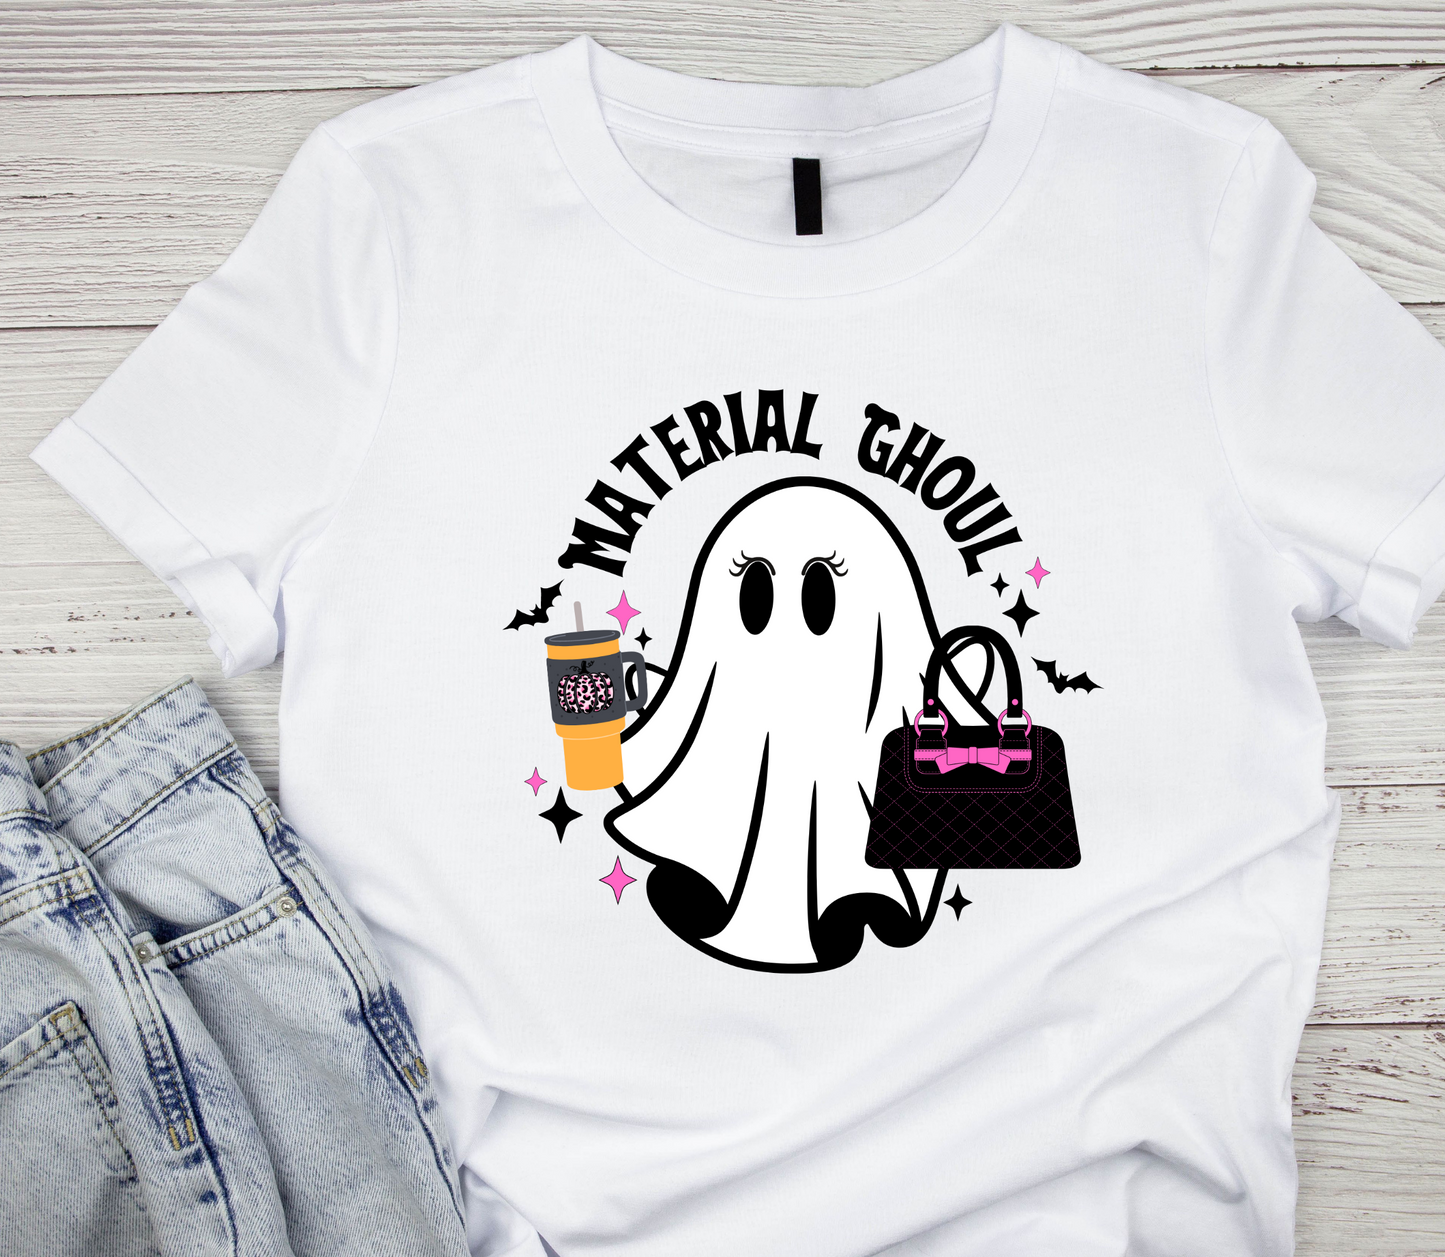 Retro ghost illustration DTF design on a white t-shirt by LuxuryDTF.com.